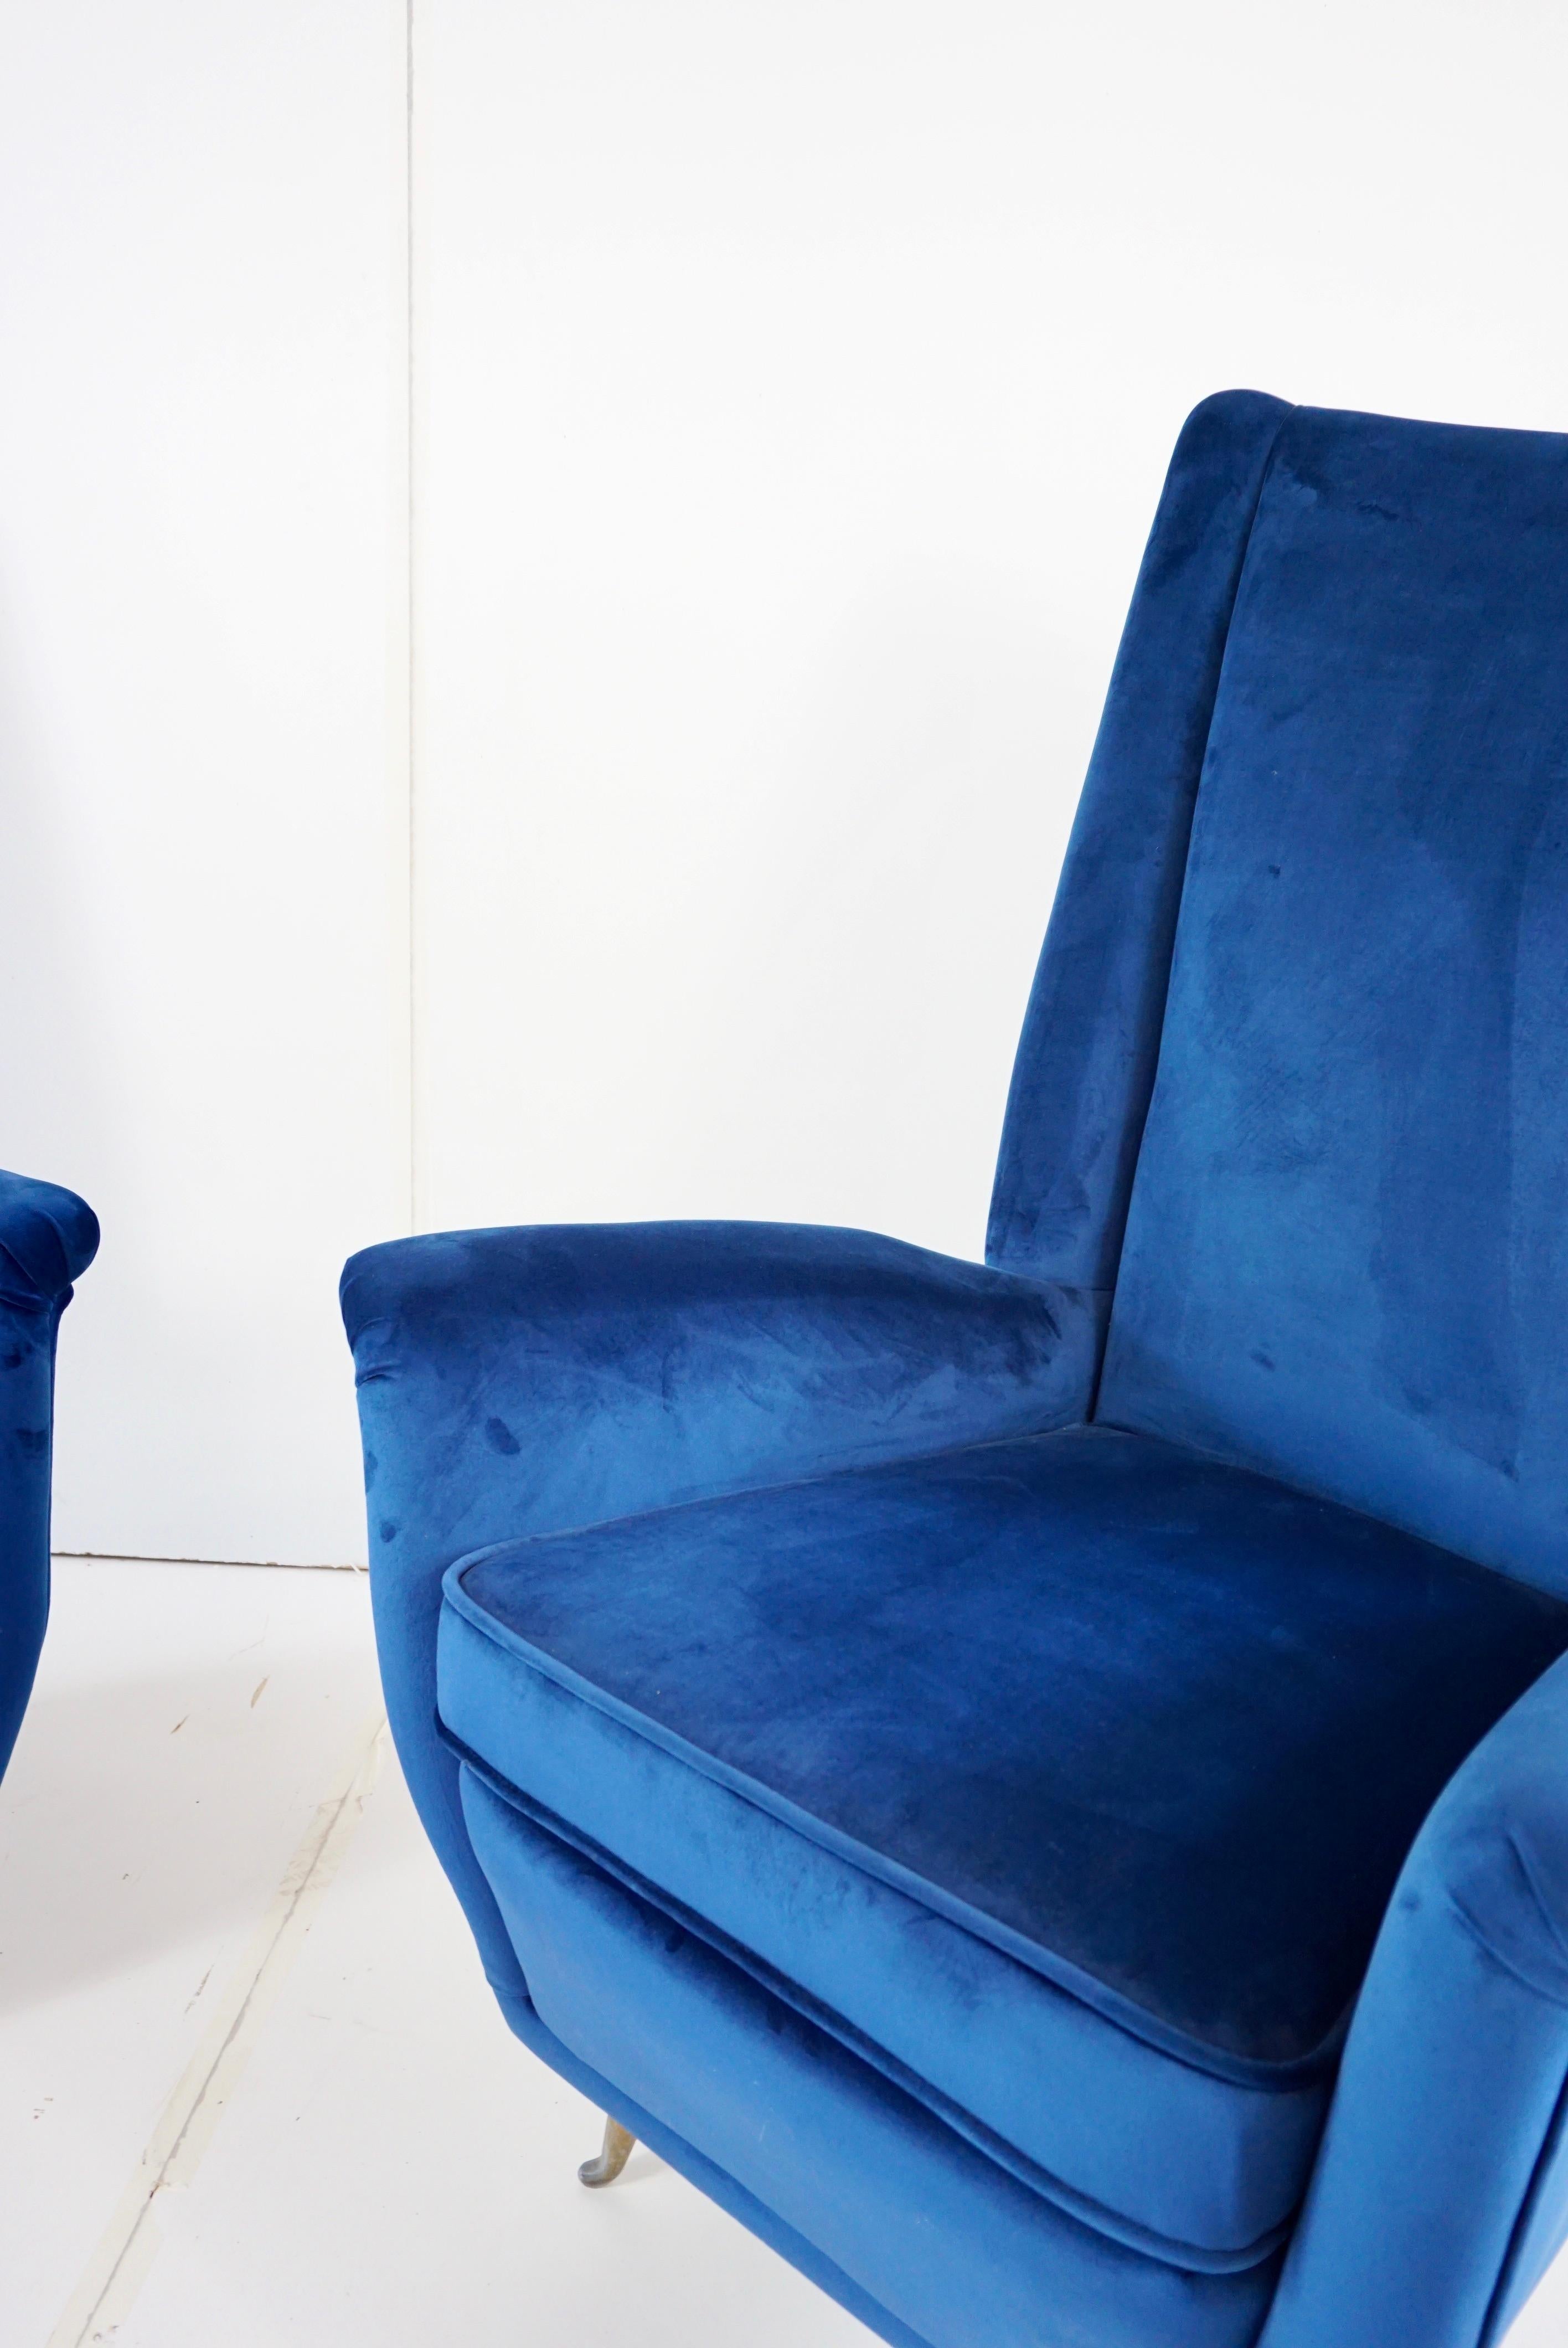 Pair of Blu Velvet Gio Ponti Bergere Wingback Armchairs by ISA, 1950 For Sale 6